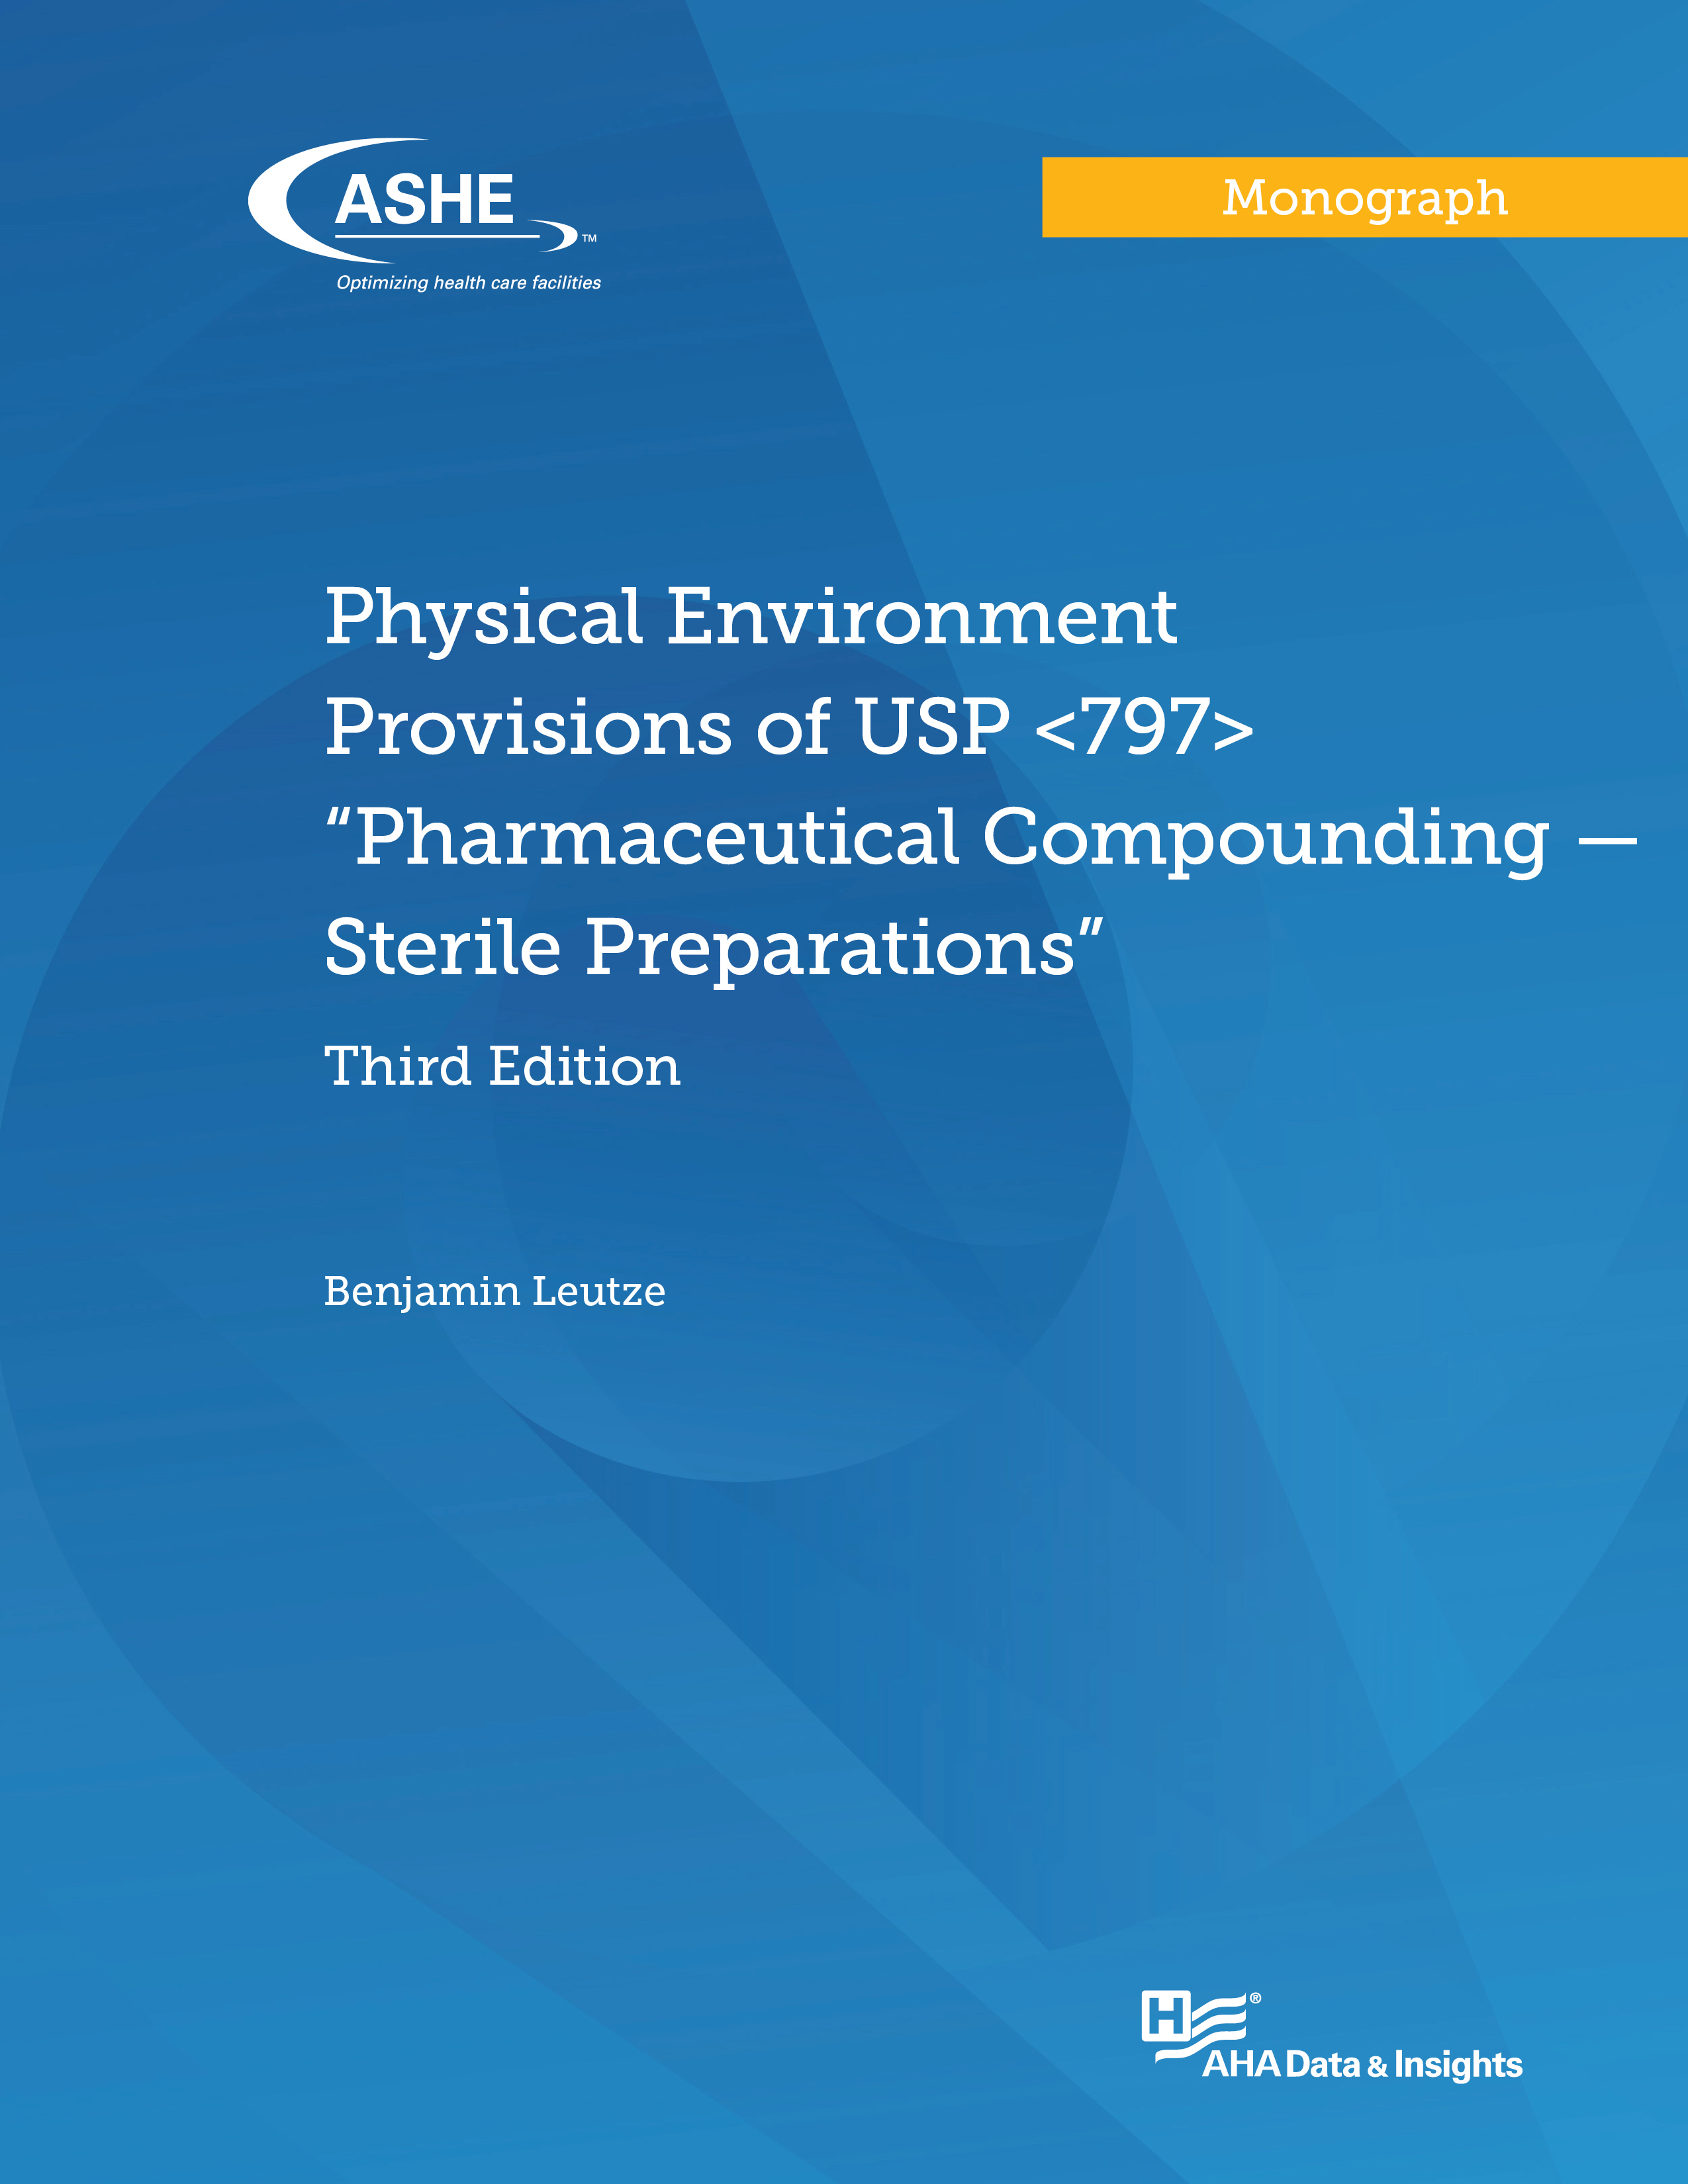 Physical Environment Provisions of USP <797> “Pharmaceutical Compounding — Sterile Preparations” Third Edition: Print Version